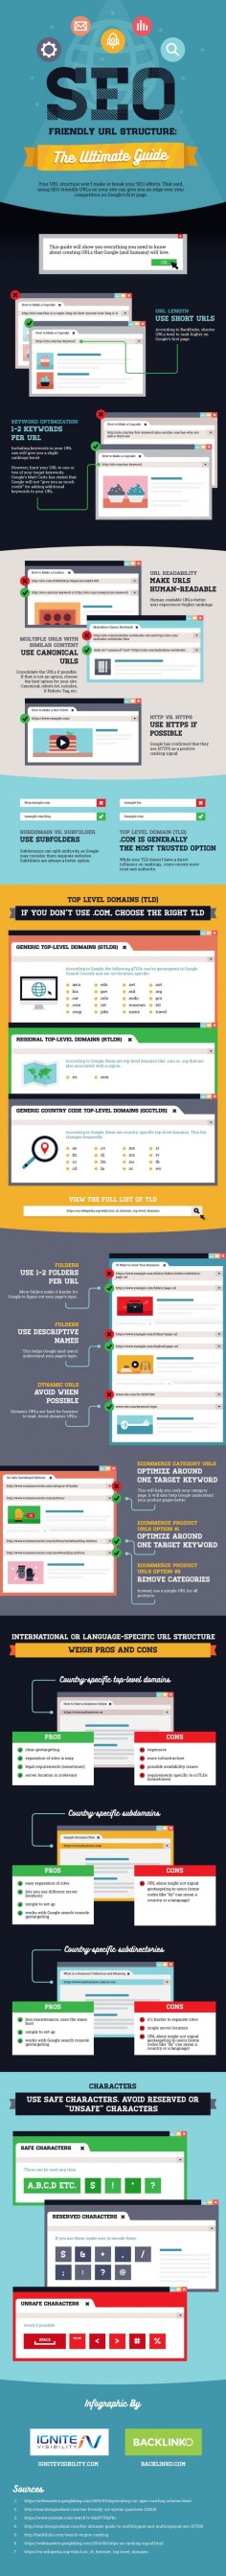 How to Make Your URLs Search-Friendly [Infographic], via @HubSpot